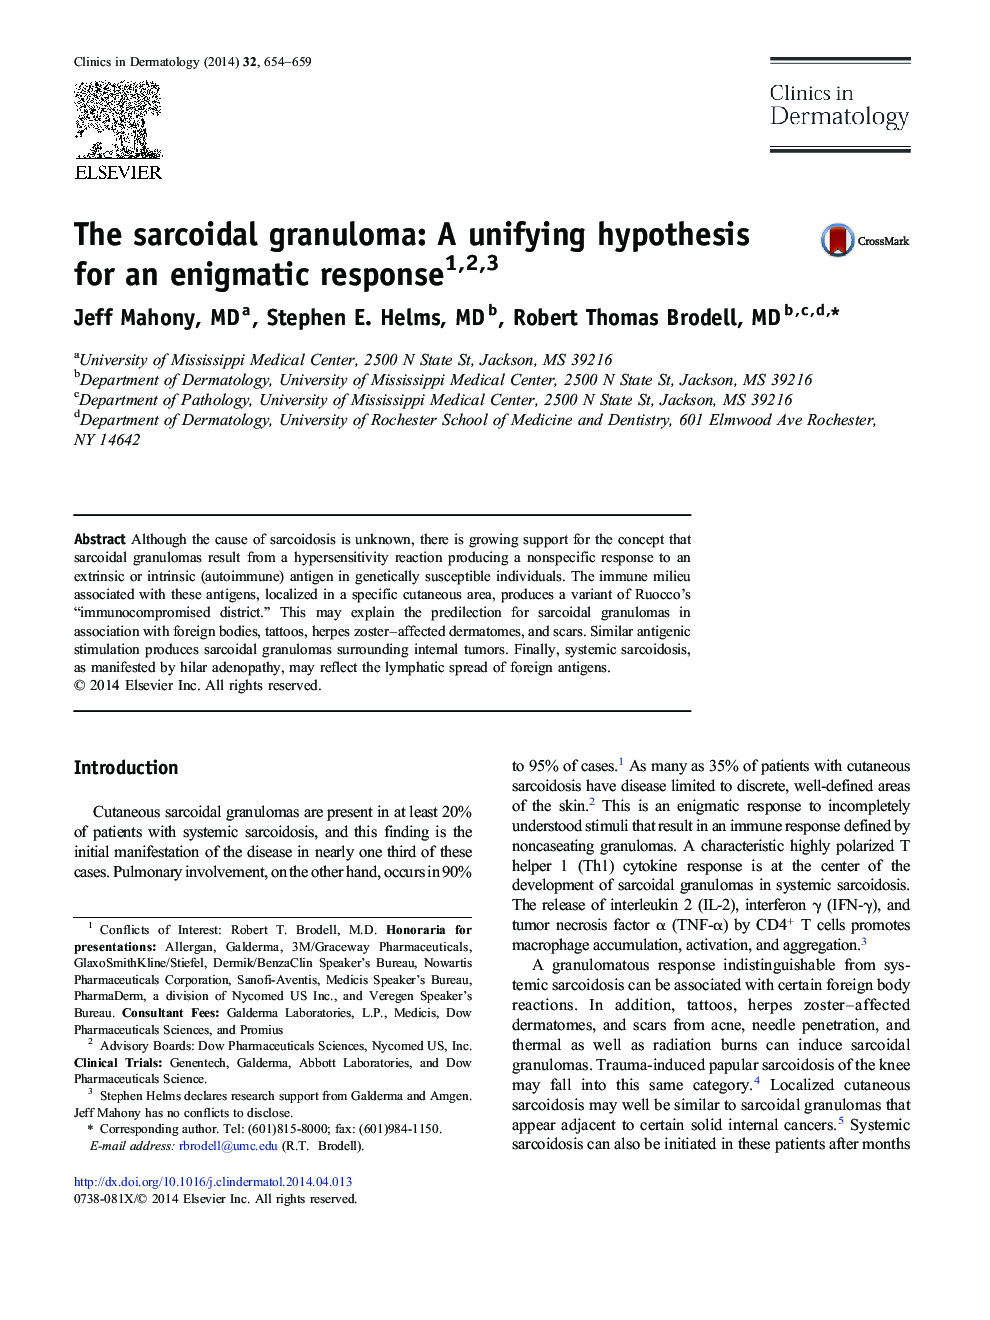 The sarcoidal granuloma: A unifying hypothesis for an enigmatic response 123